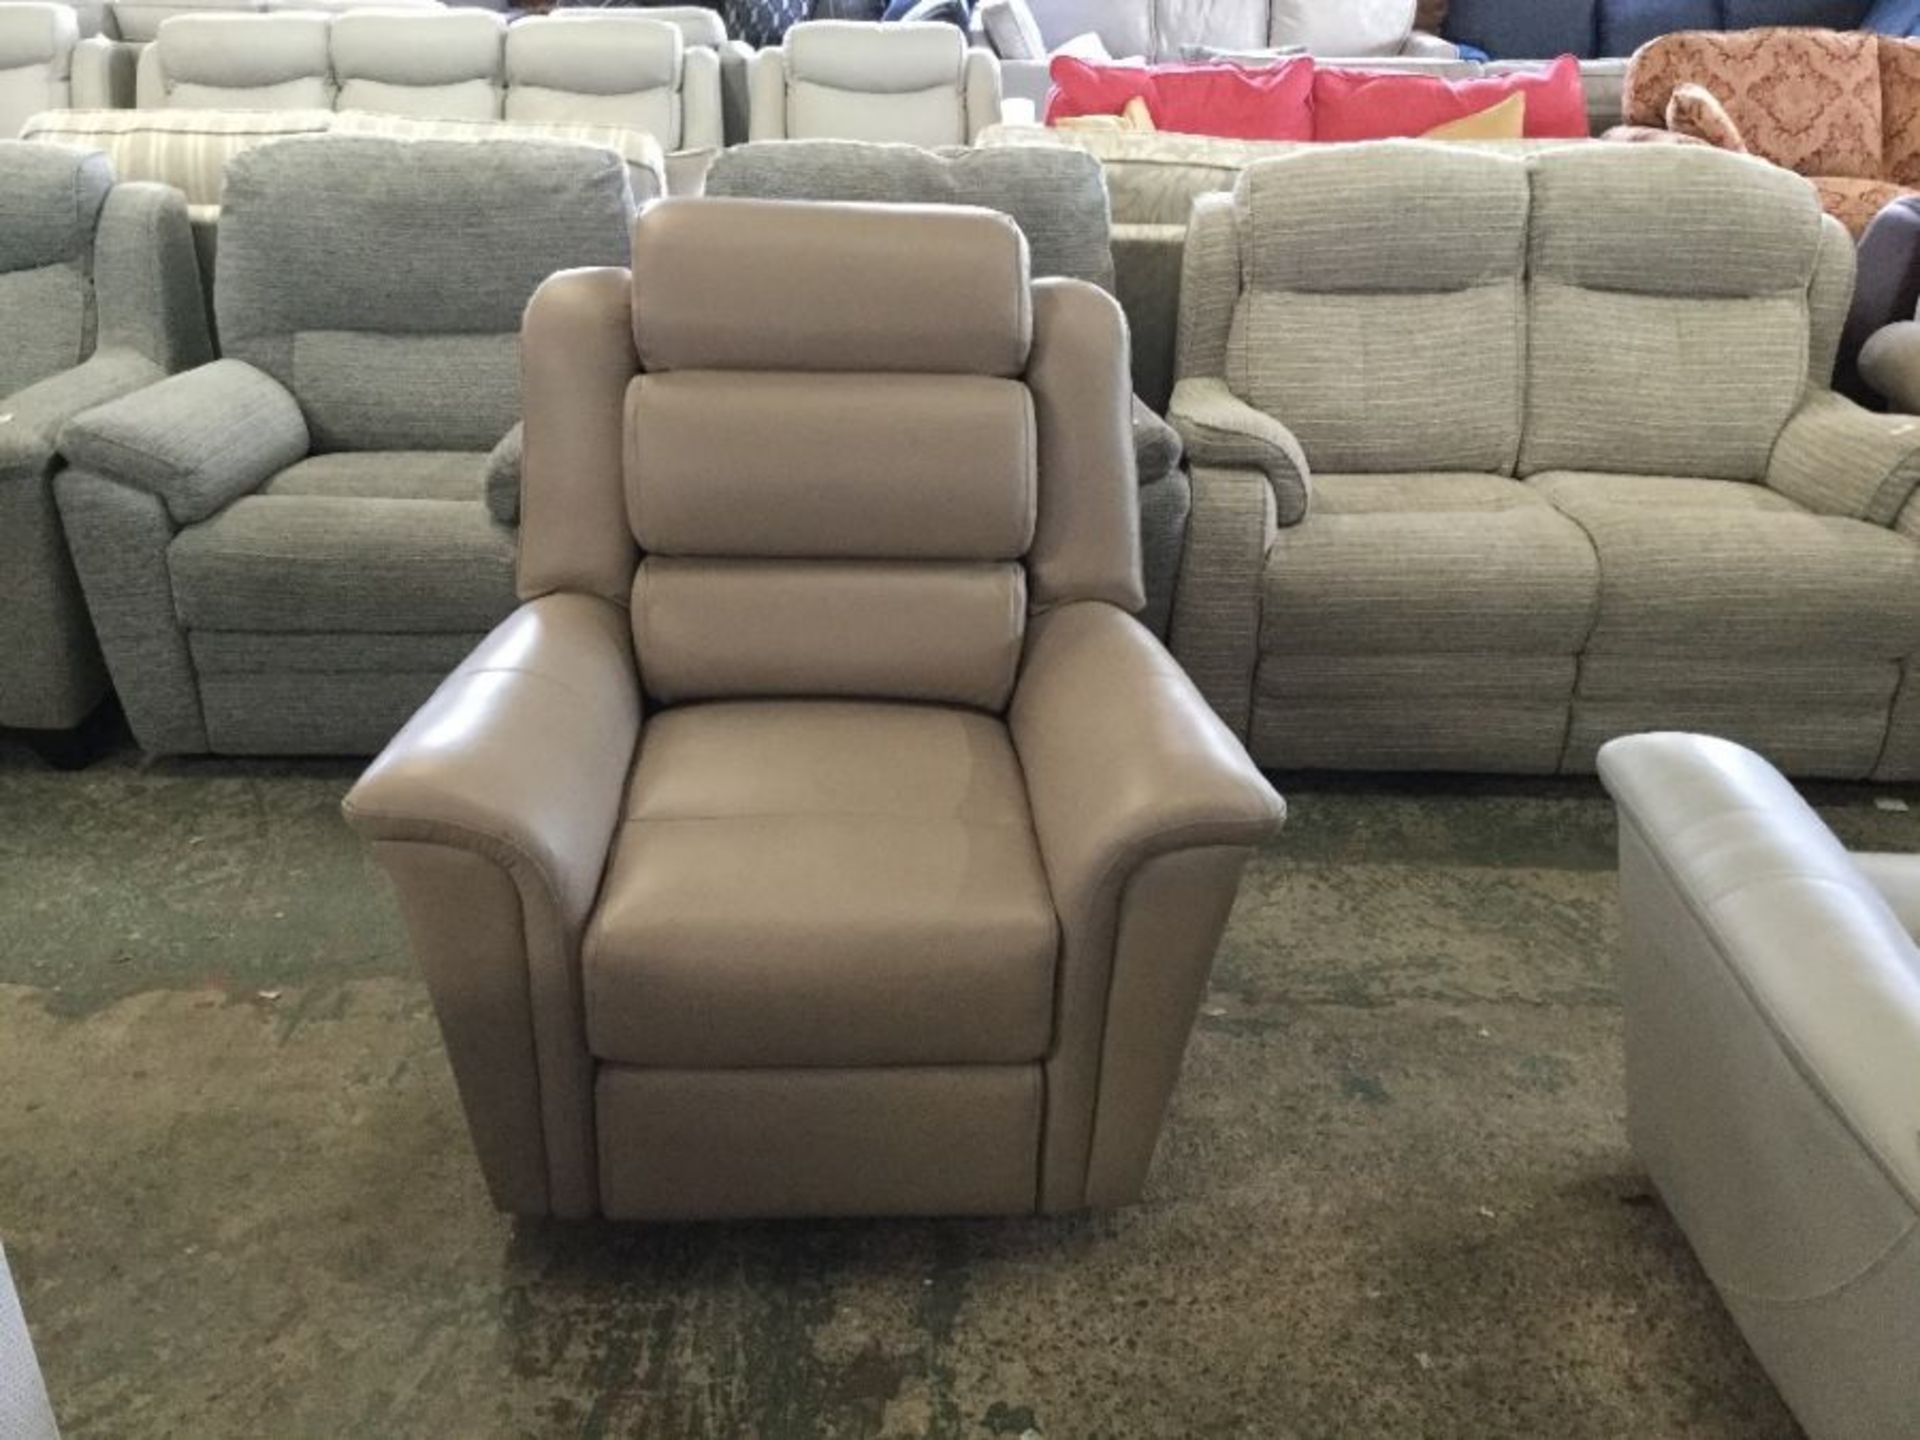 BEIGE LEATHER CHAIR (P-14 W01119579)